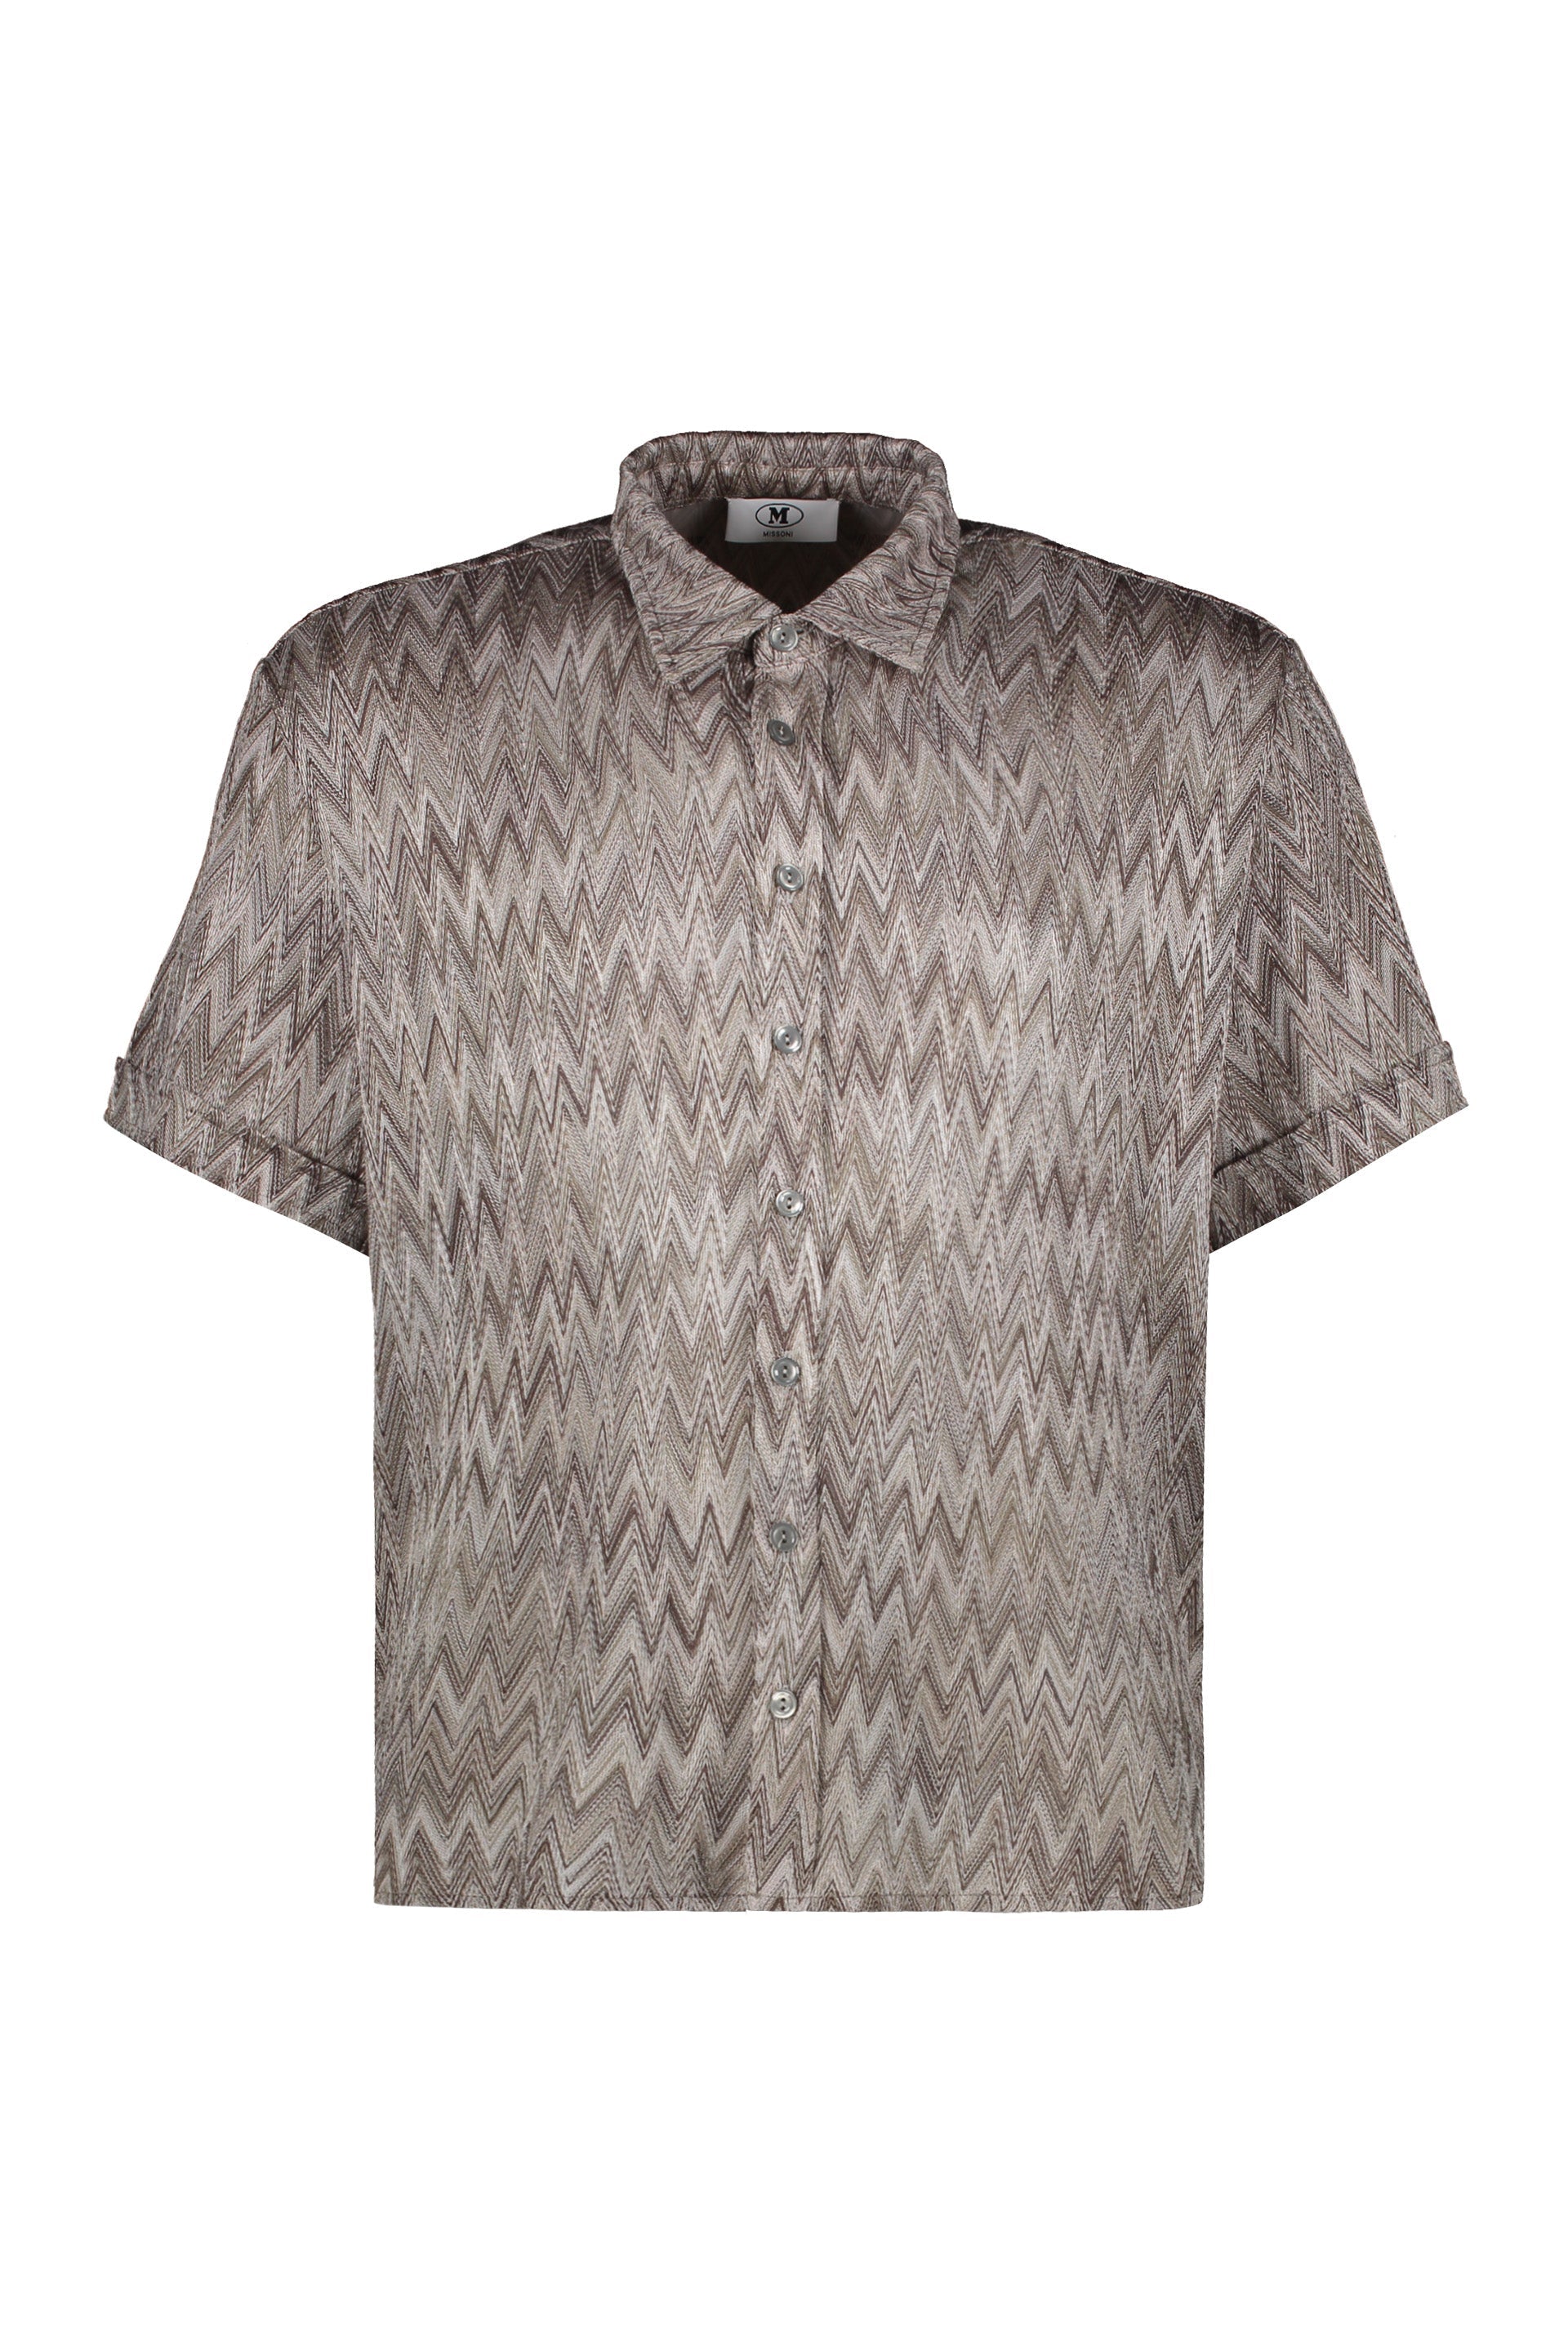 Missoni-OUTLET-SALE-Short-sleeve-shirt-Shirts-ARCHIVE-COLLECTION-2.jpg